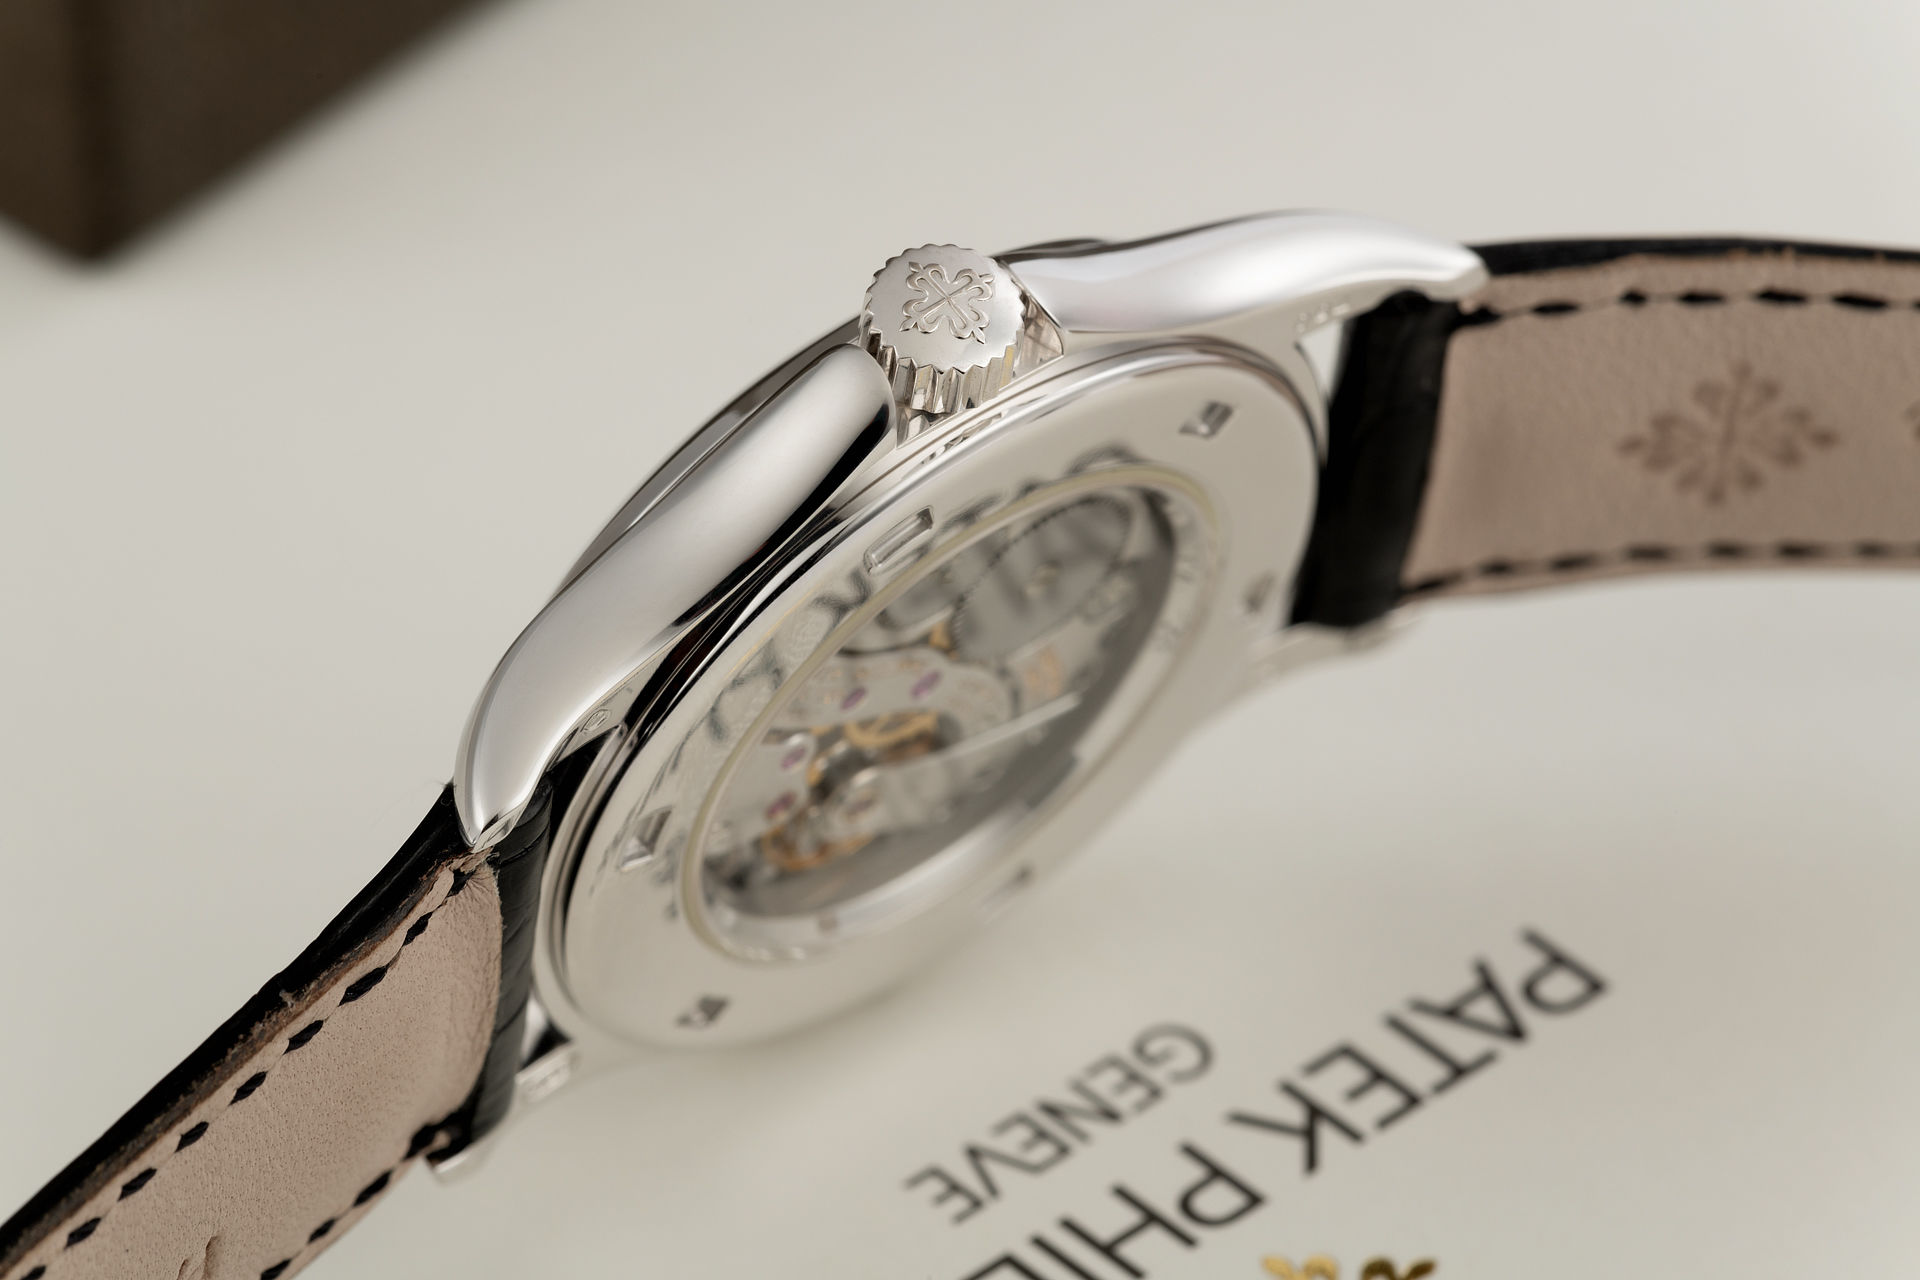 ref 5134G | 'Extract From The Archives' | Patek Philippe Travel Time